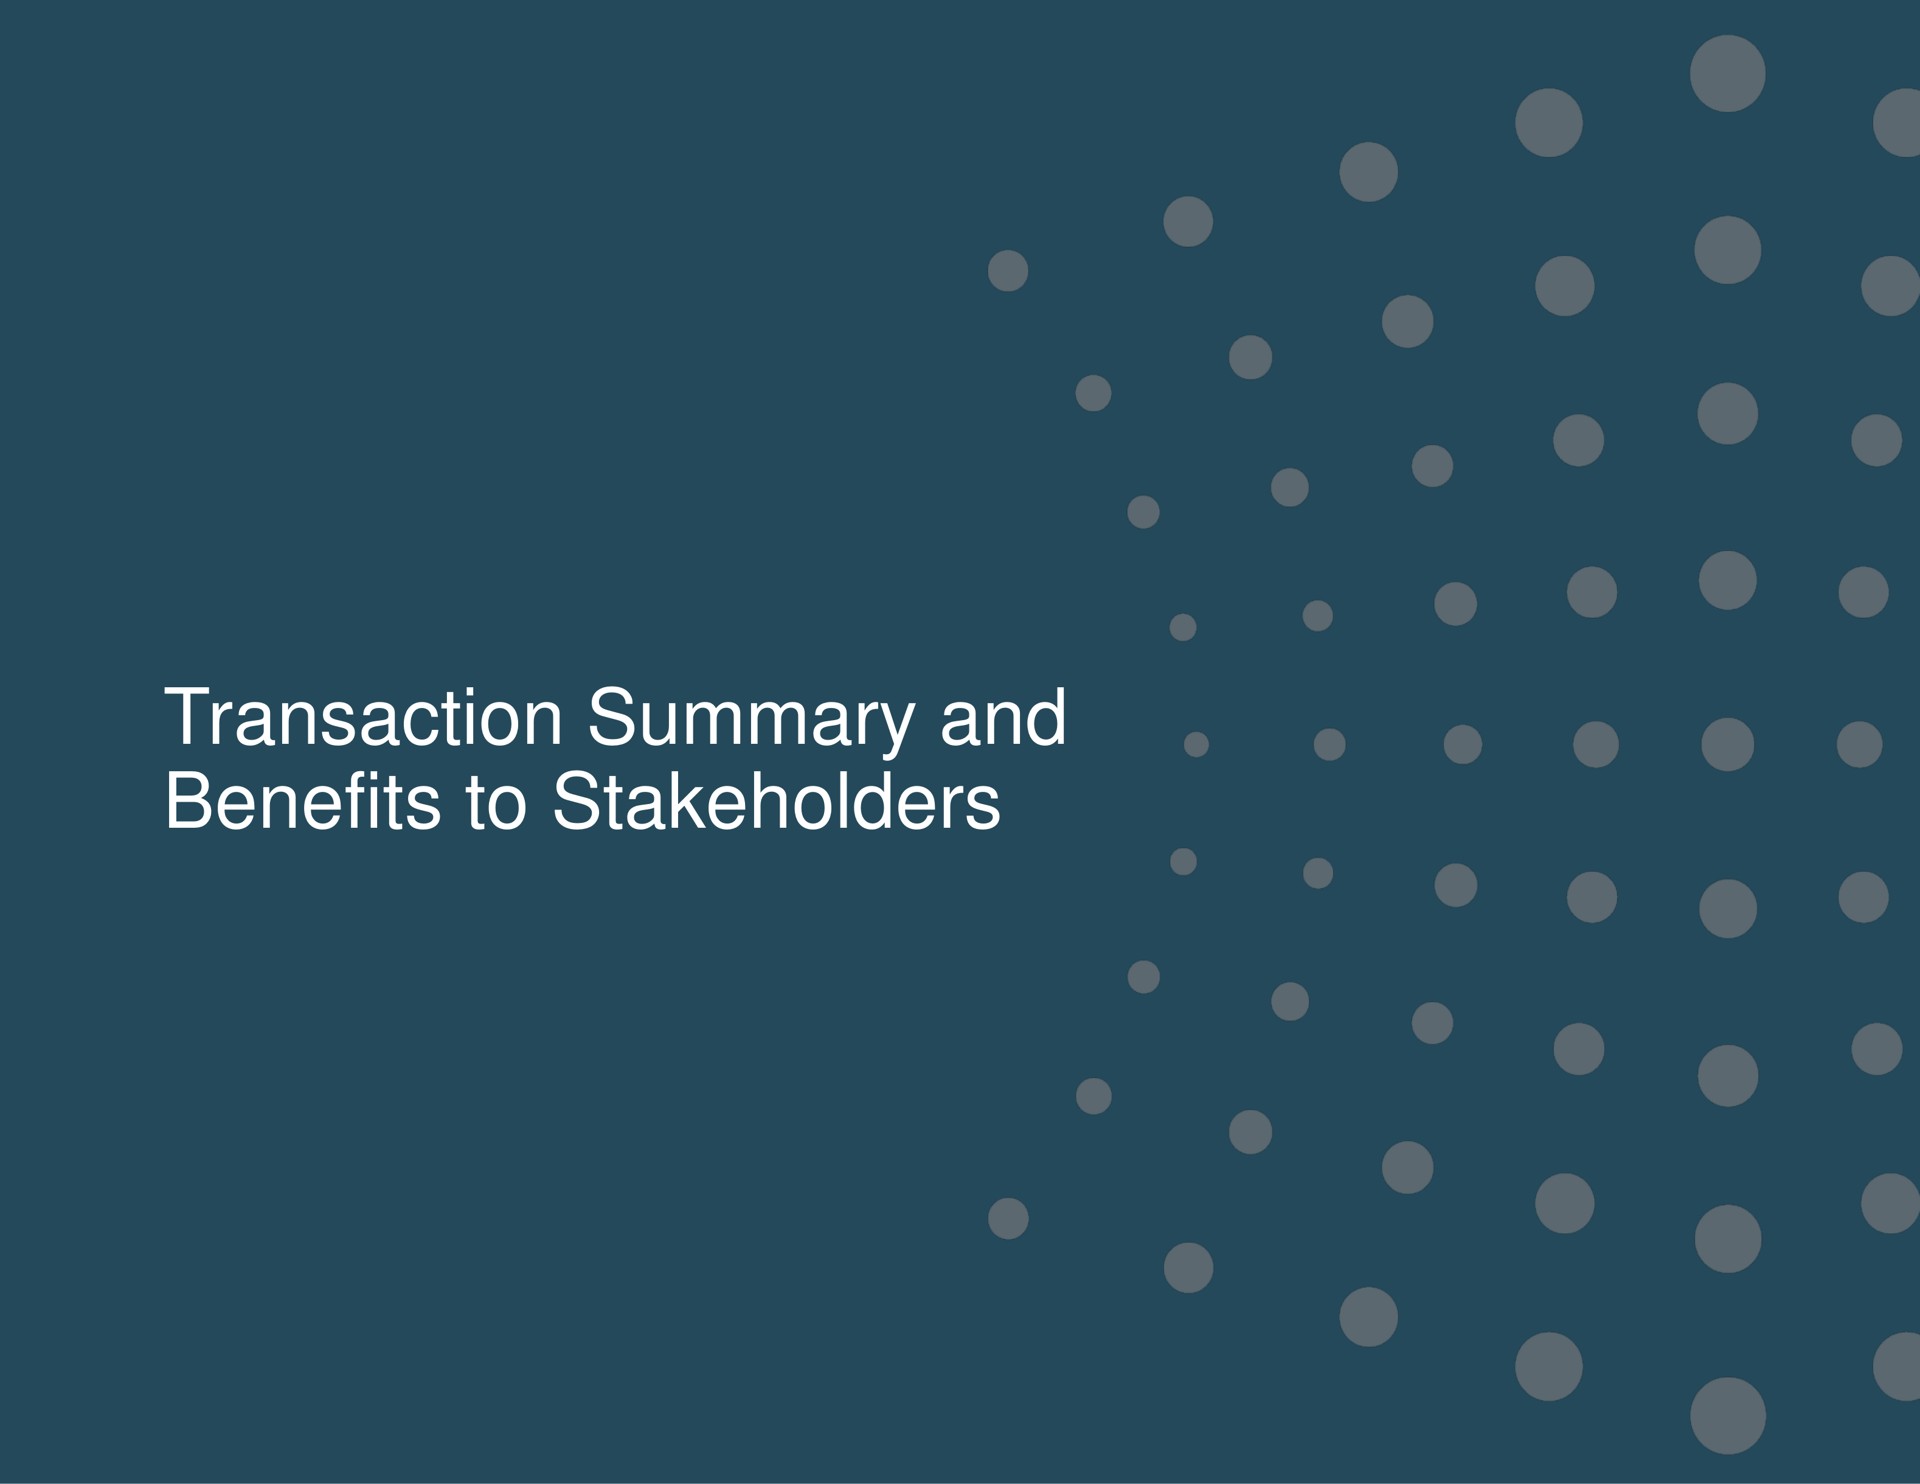 transaction summary and benefits to stakeholders | Ready Capital